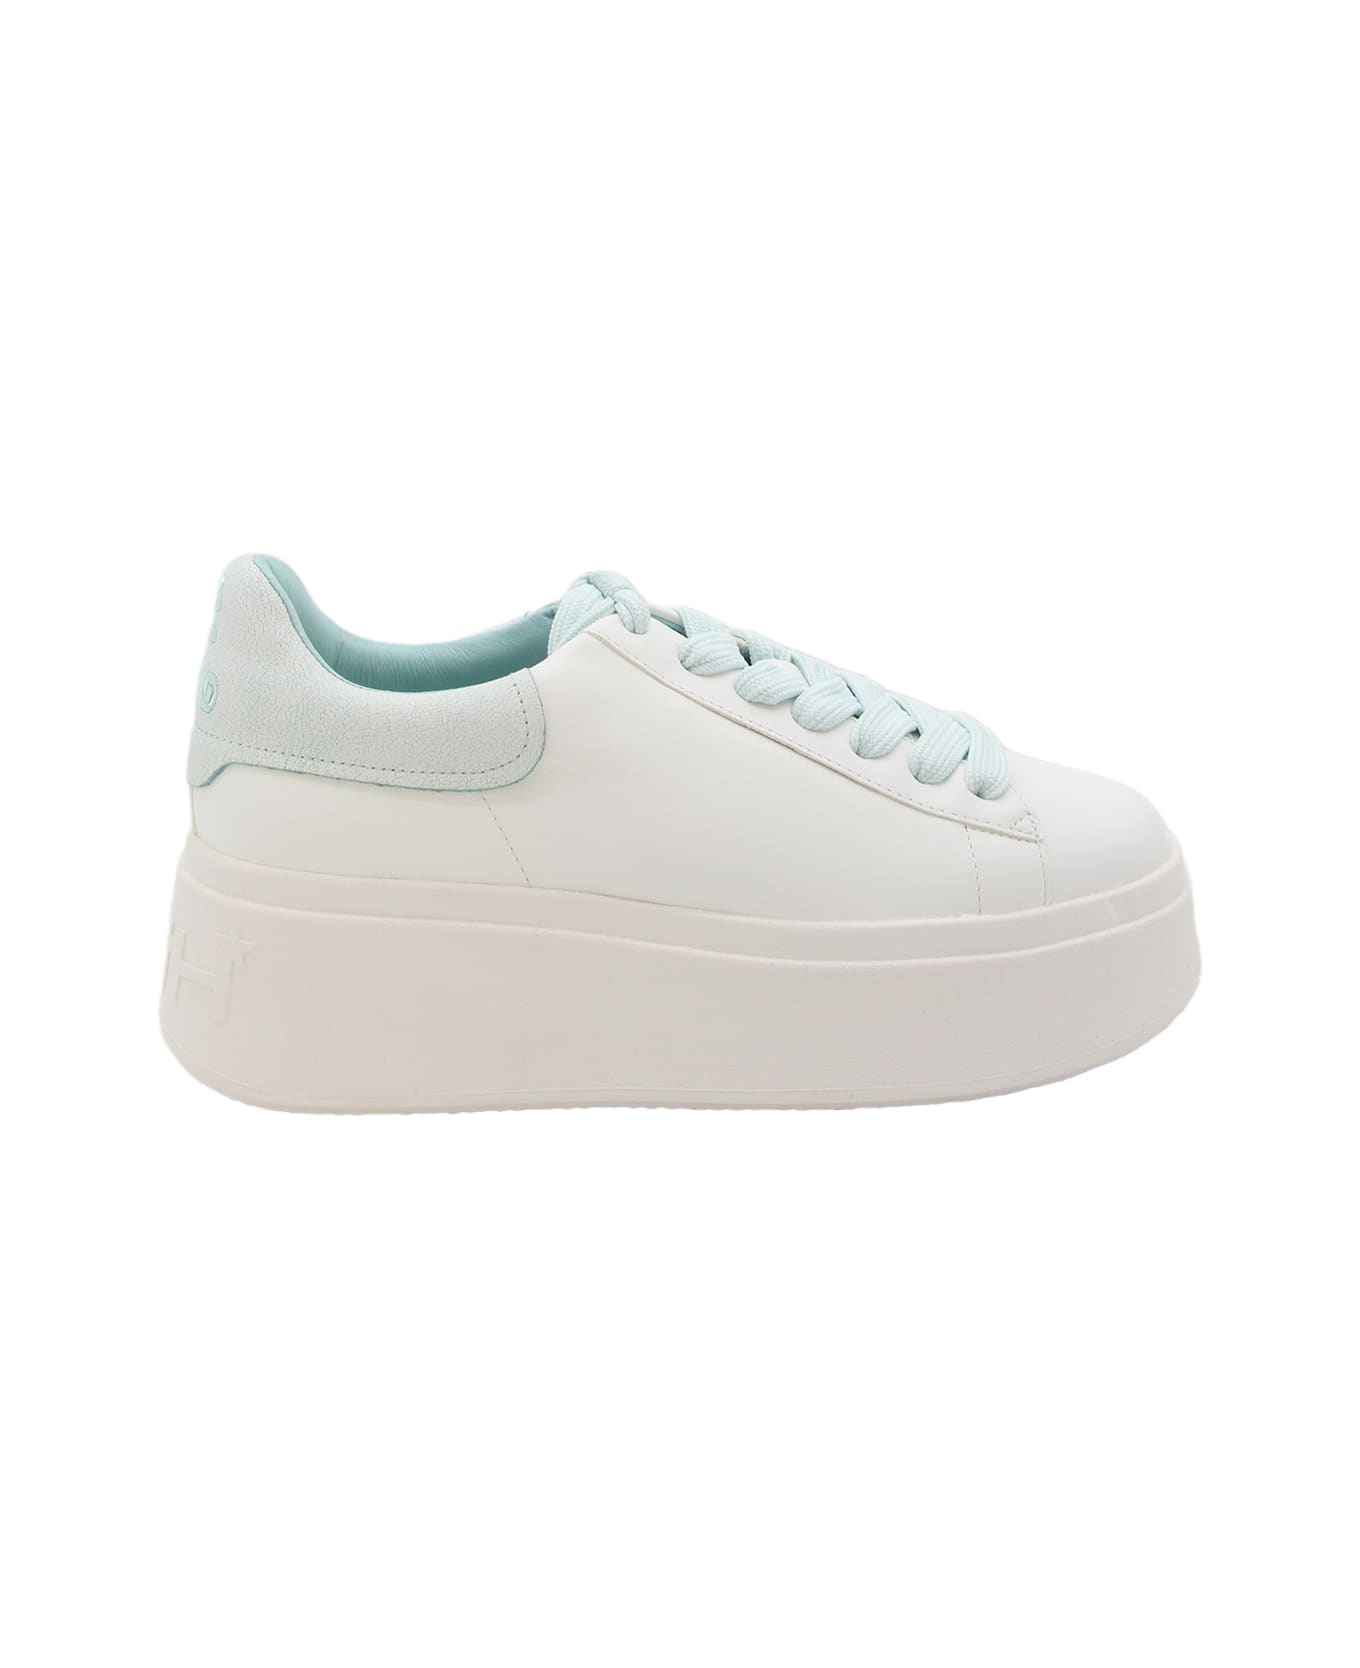 Ash White Leather Sneakers - WHITE/WATER ウェッジシューズ